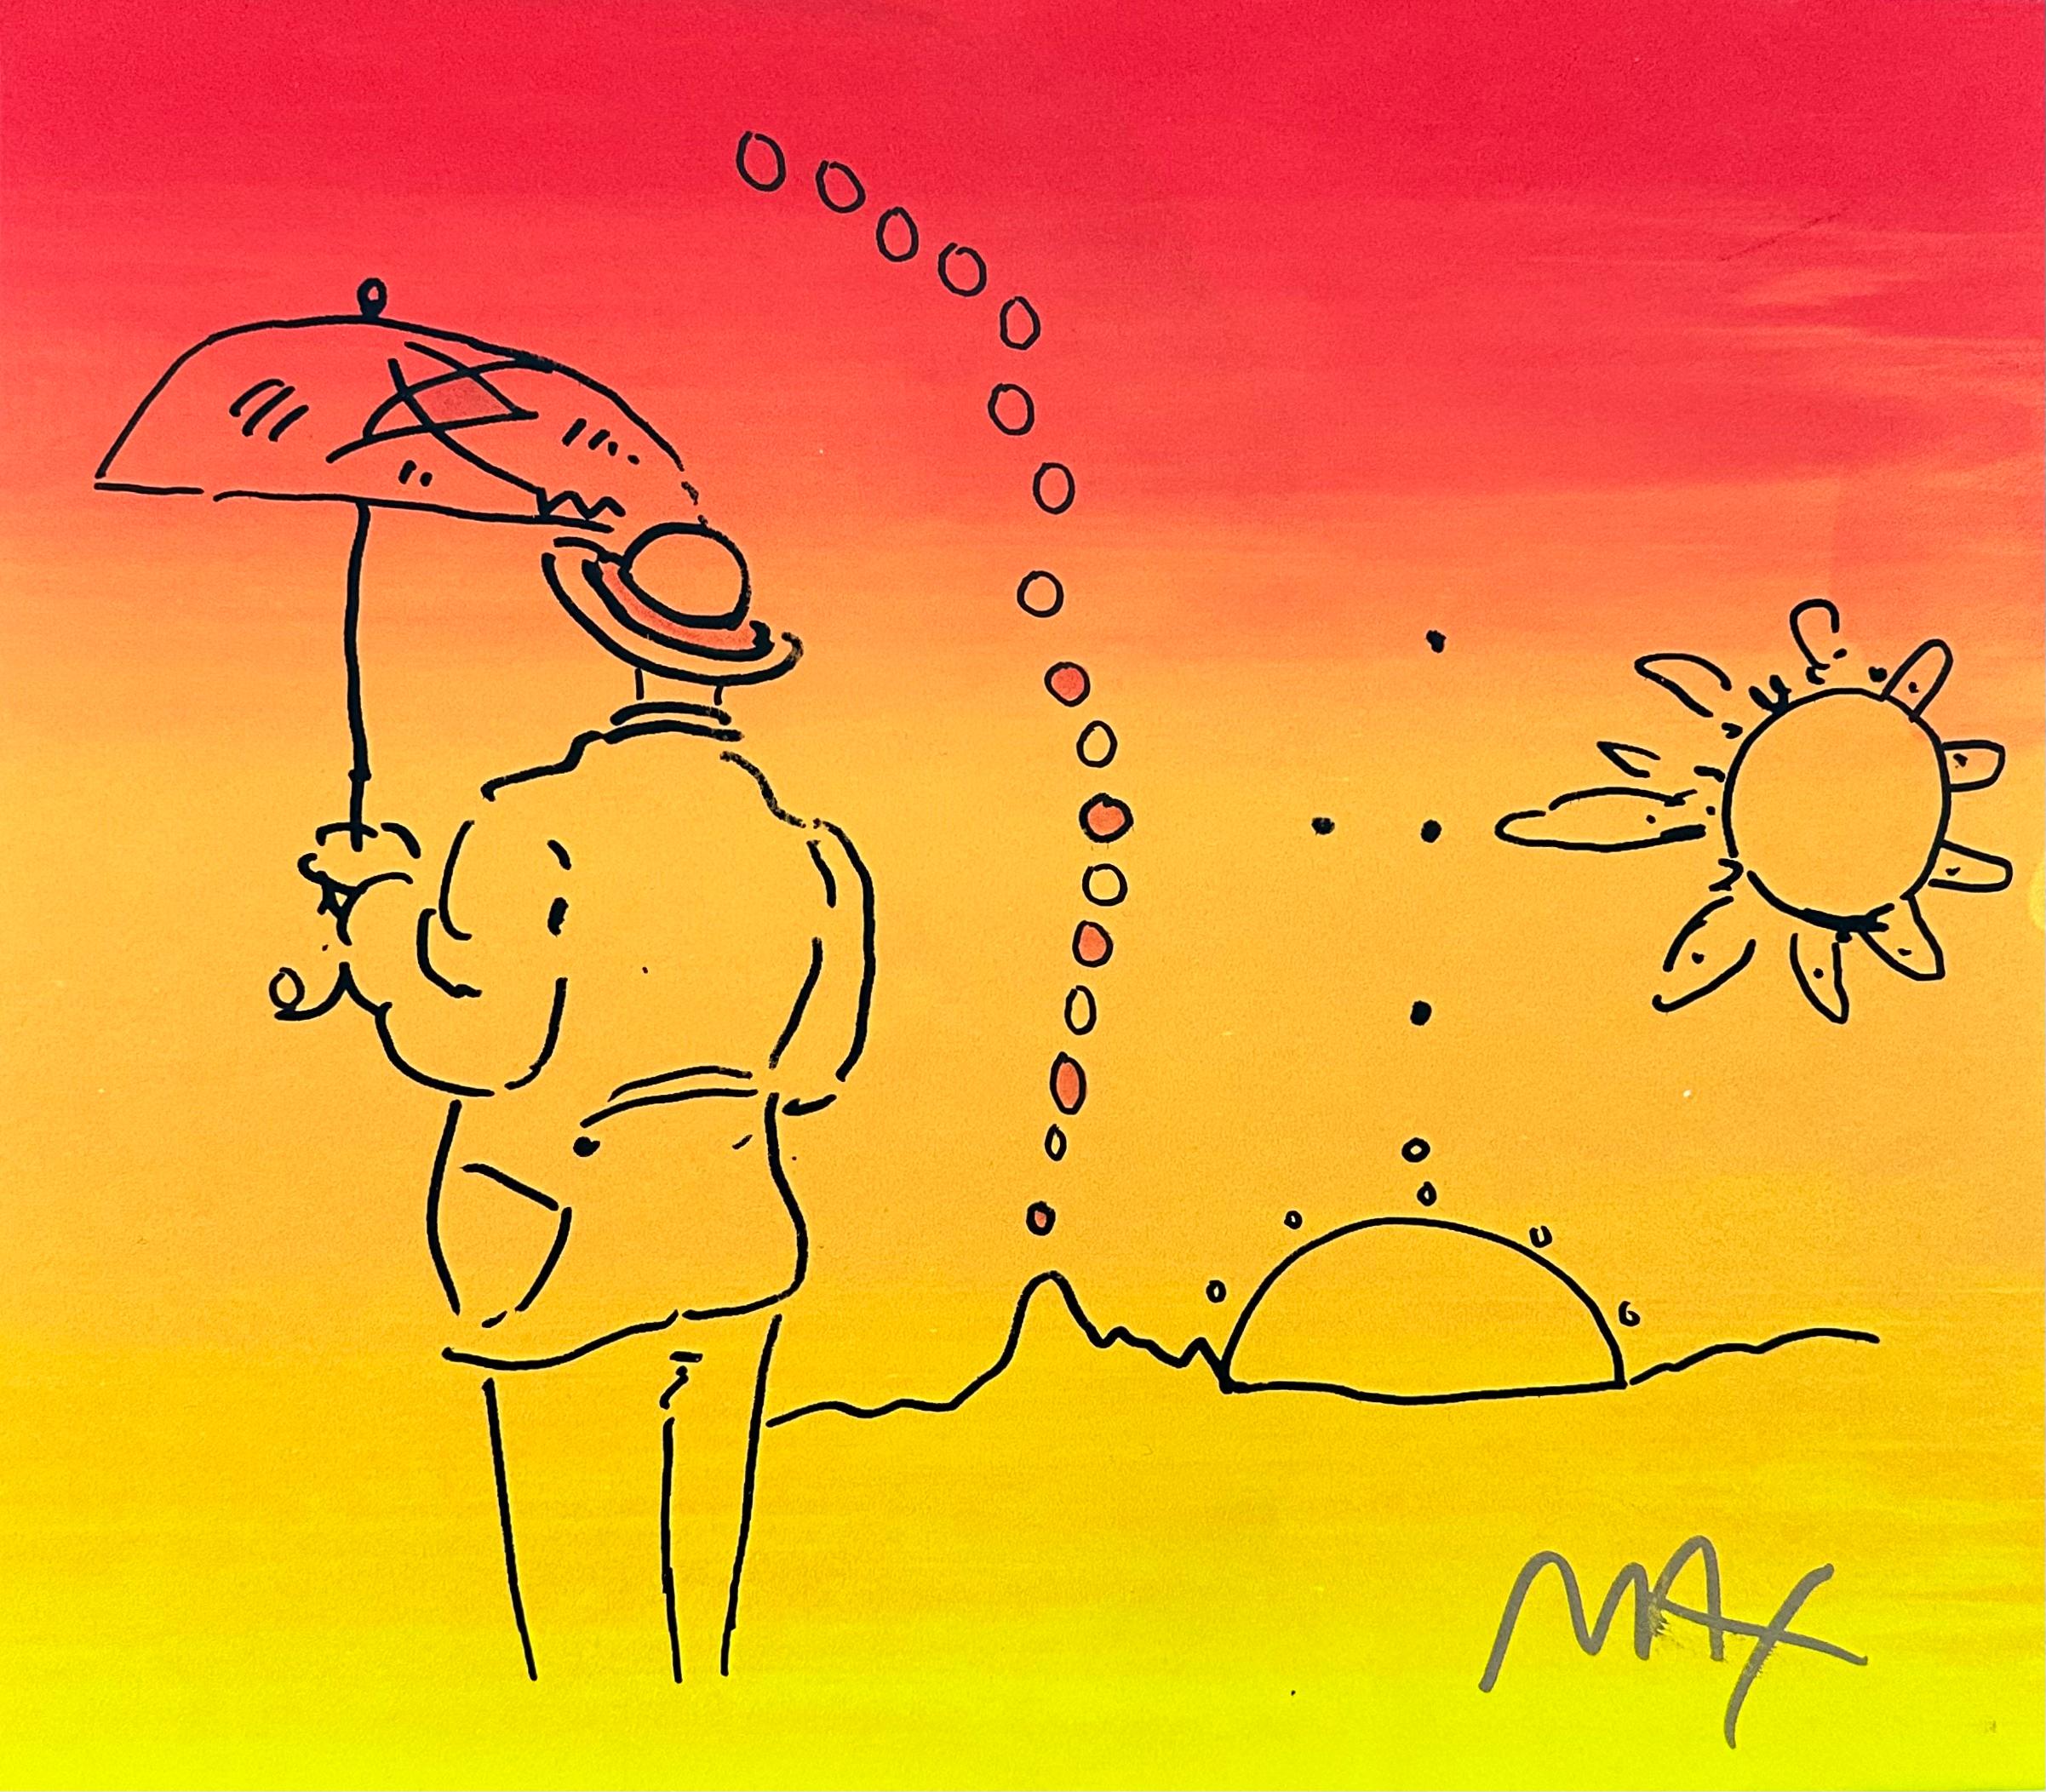 Artist: Peter Max (1937)
Title: Umbrella Man
Year: circa 1998
Medium: Silkscreen and watercolor on archival paper
Size: 12 x 13.75 inches
Condition: Excellent
Inscription: Signed in permanent marker

PETER MAX (1937- ) Peter Max has achieved huge